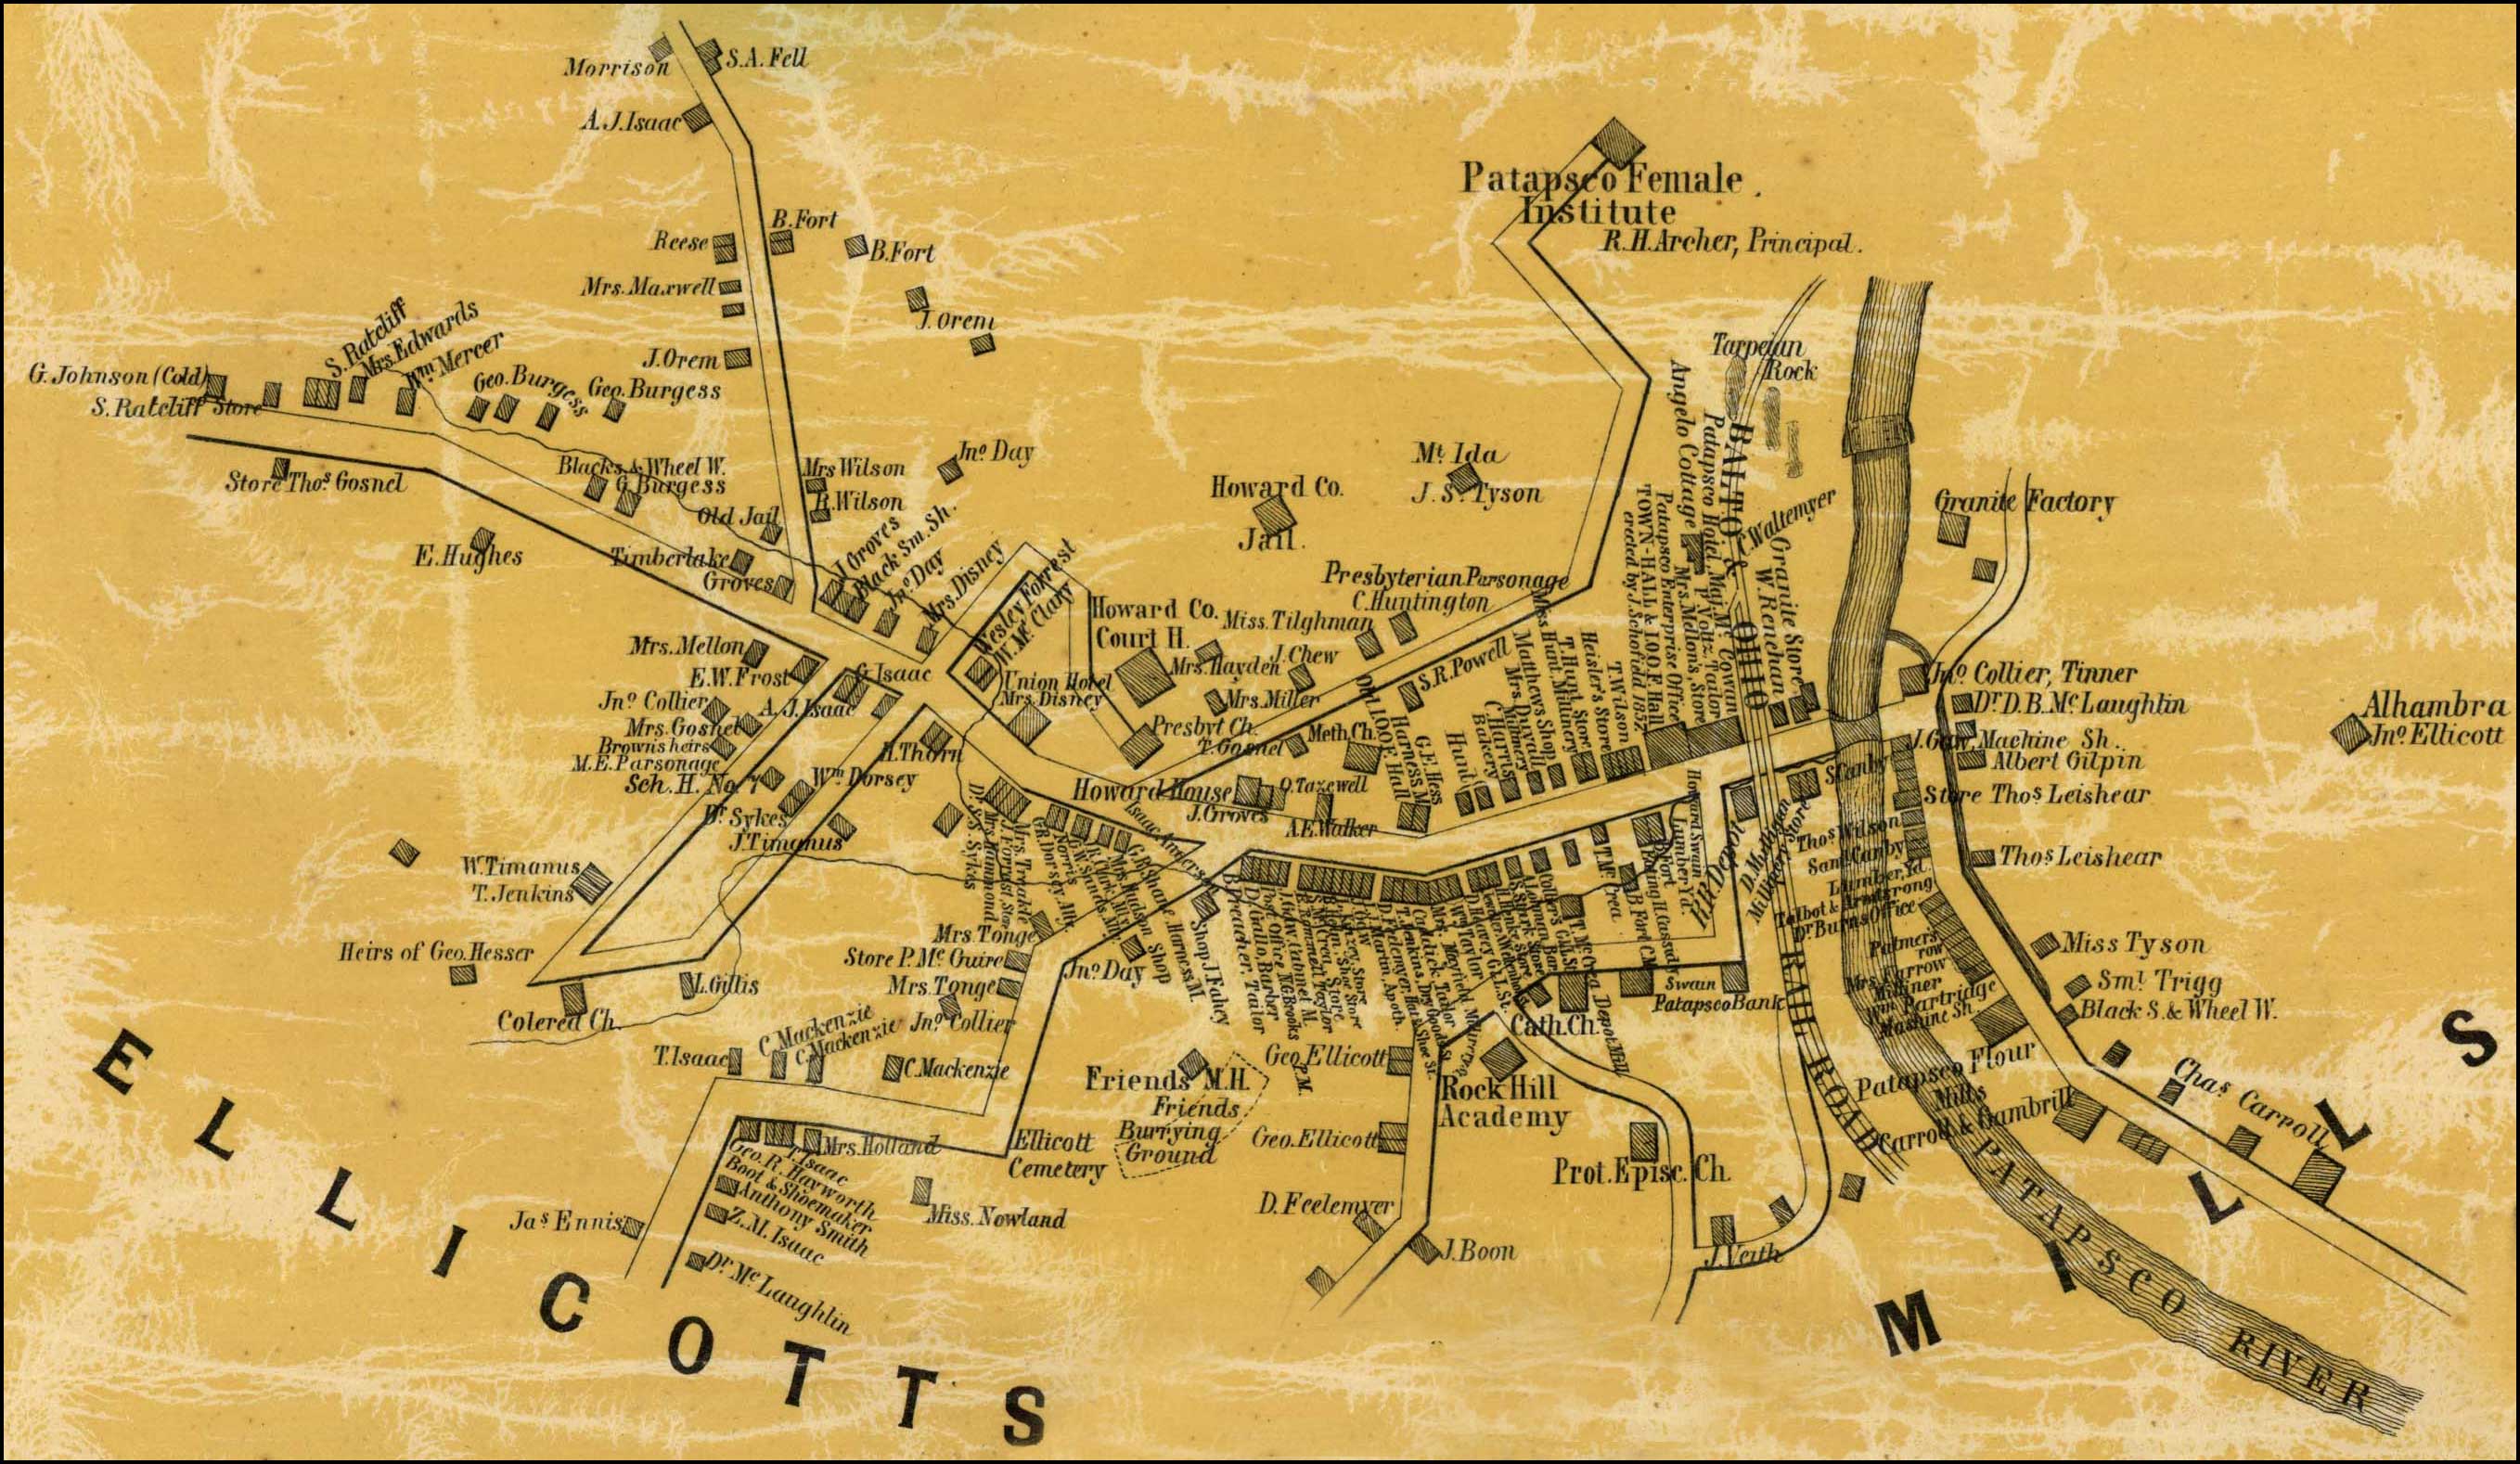 Detail of Ellicotts Mills from Simon J. Martenet, Map of Howard County, 1860, Library of Congress, MSA SC 1213-1-467